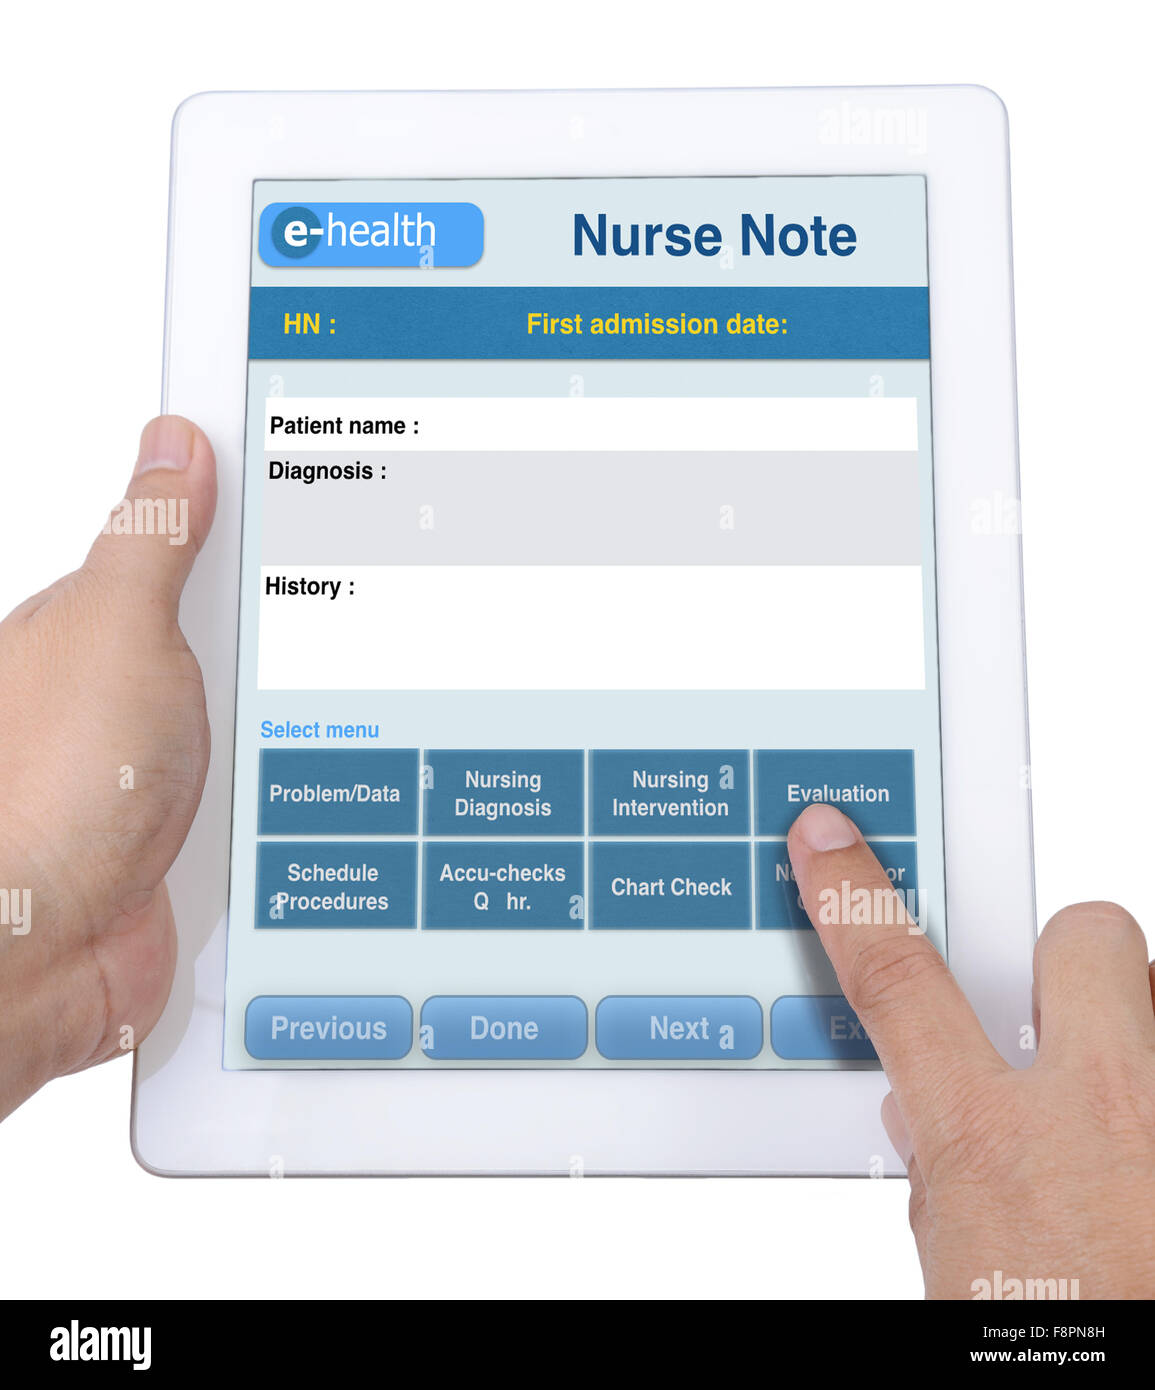 Using of health information technology on tablet computer for medical and nurse note record. Stock Photo